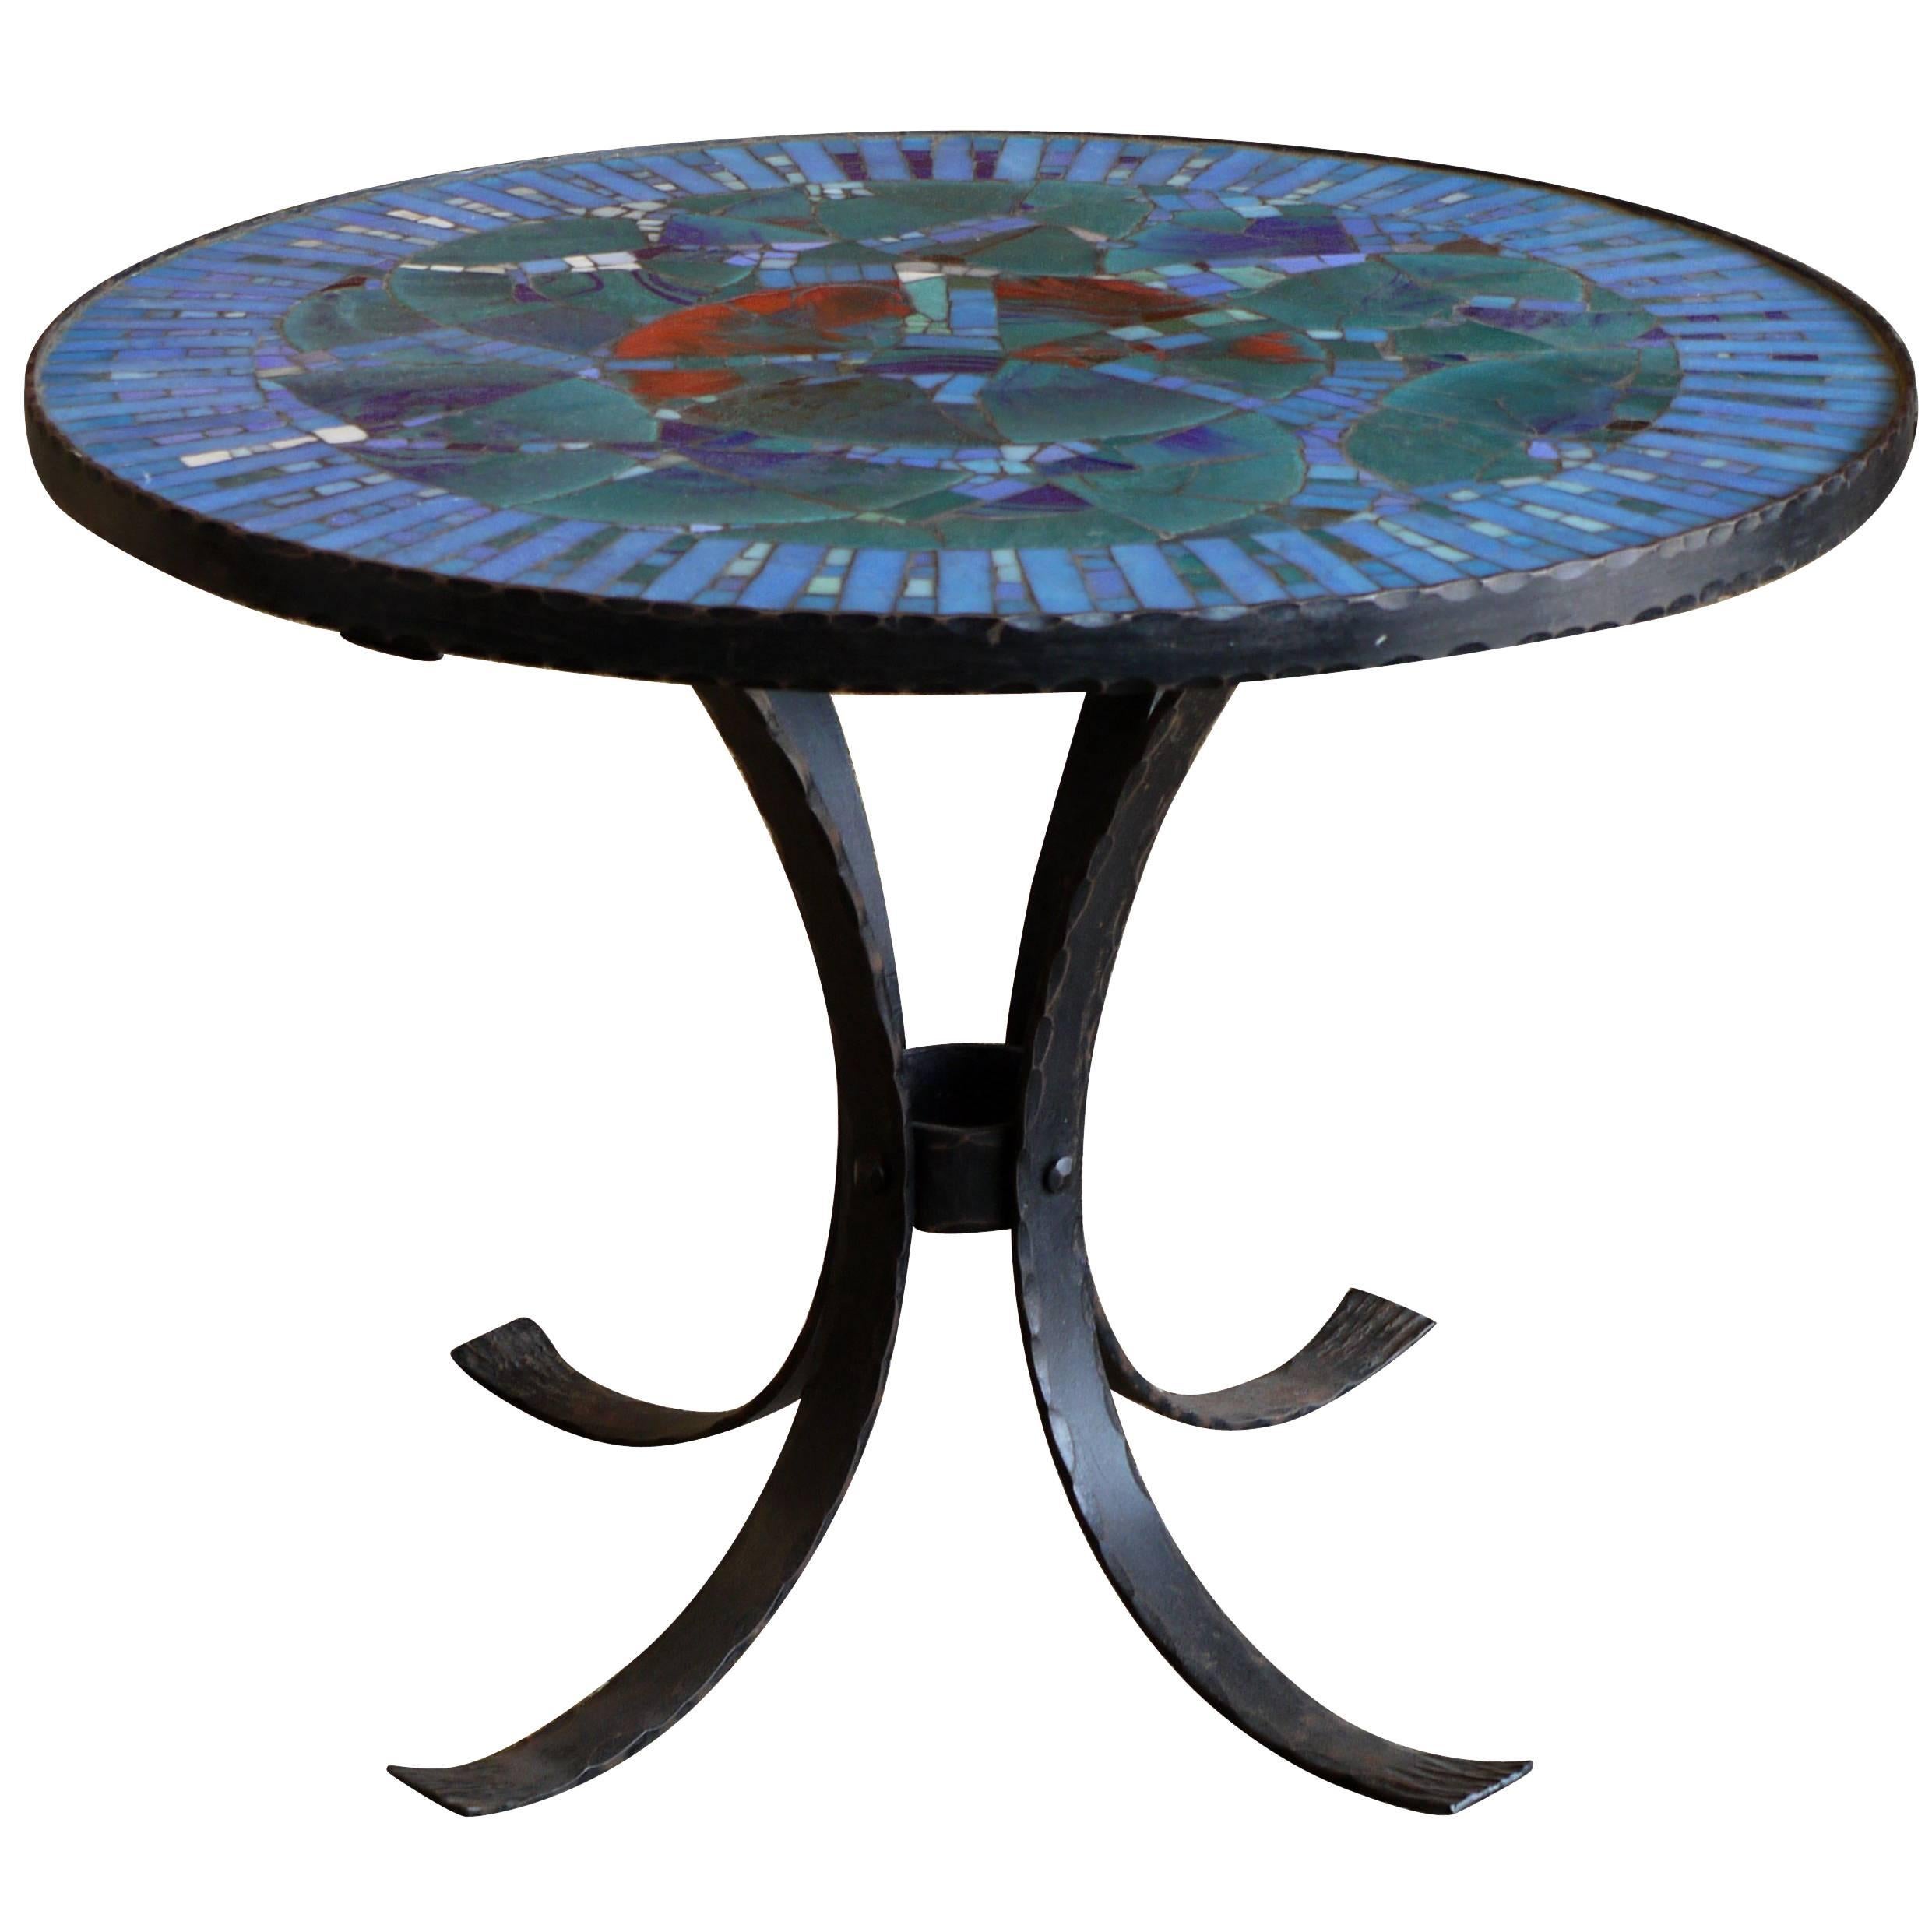 1950s Italian Forged Iron and Vitreous Glass Mosaic Table For Sale